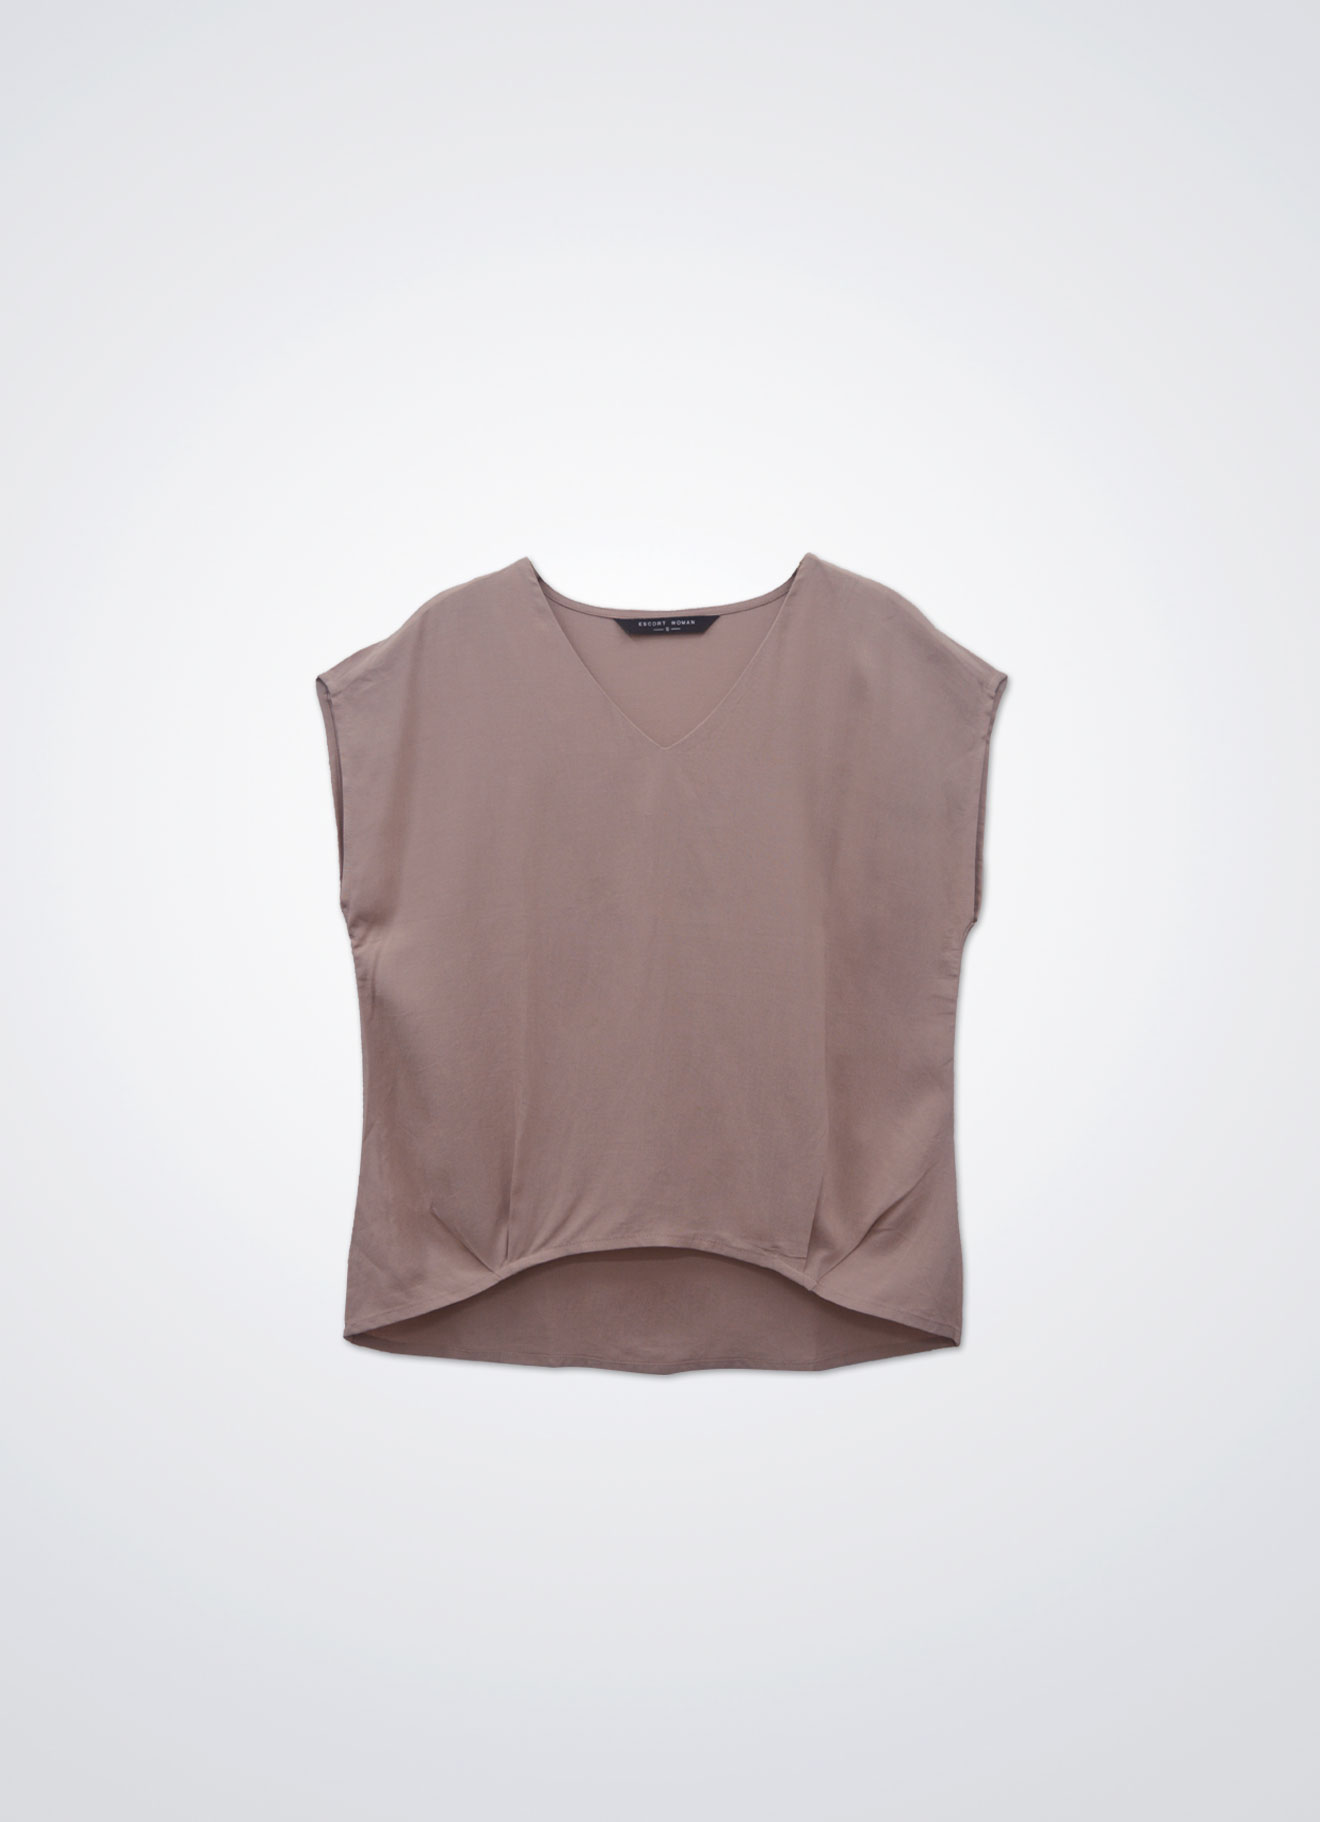 Maple-Sugar by Sleeve Blouse